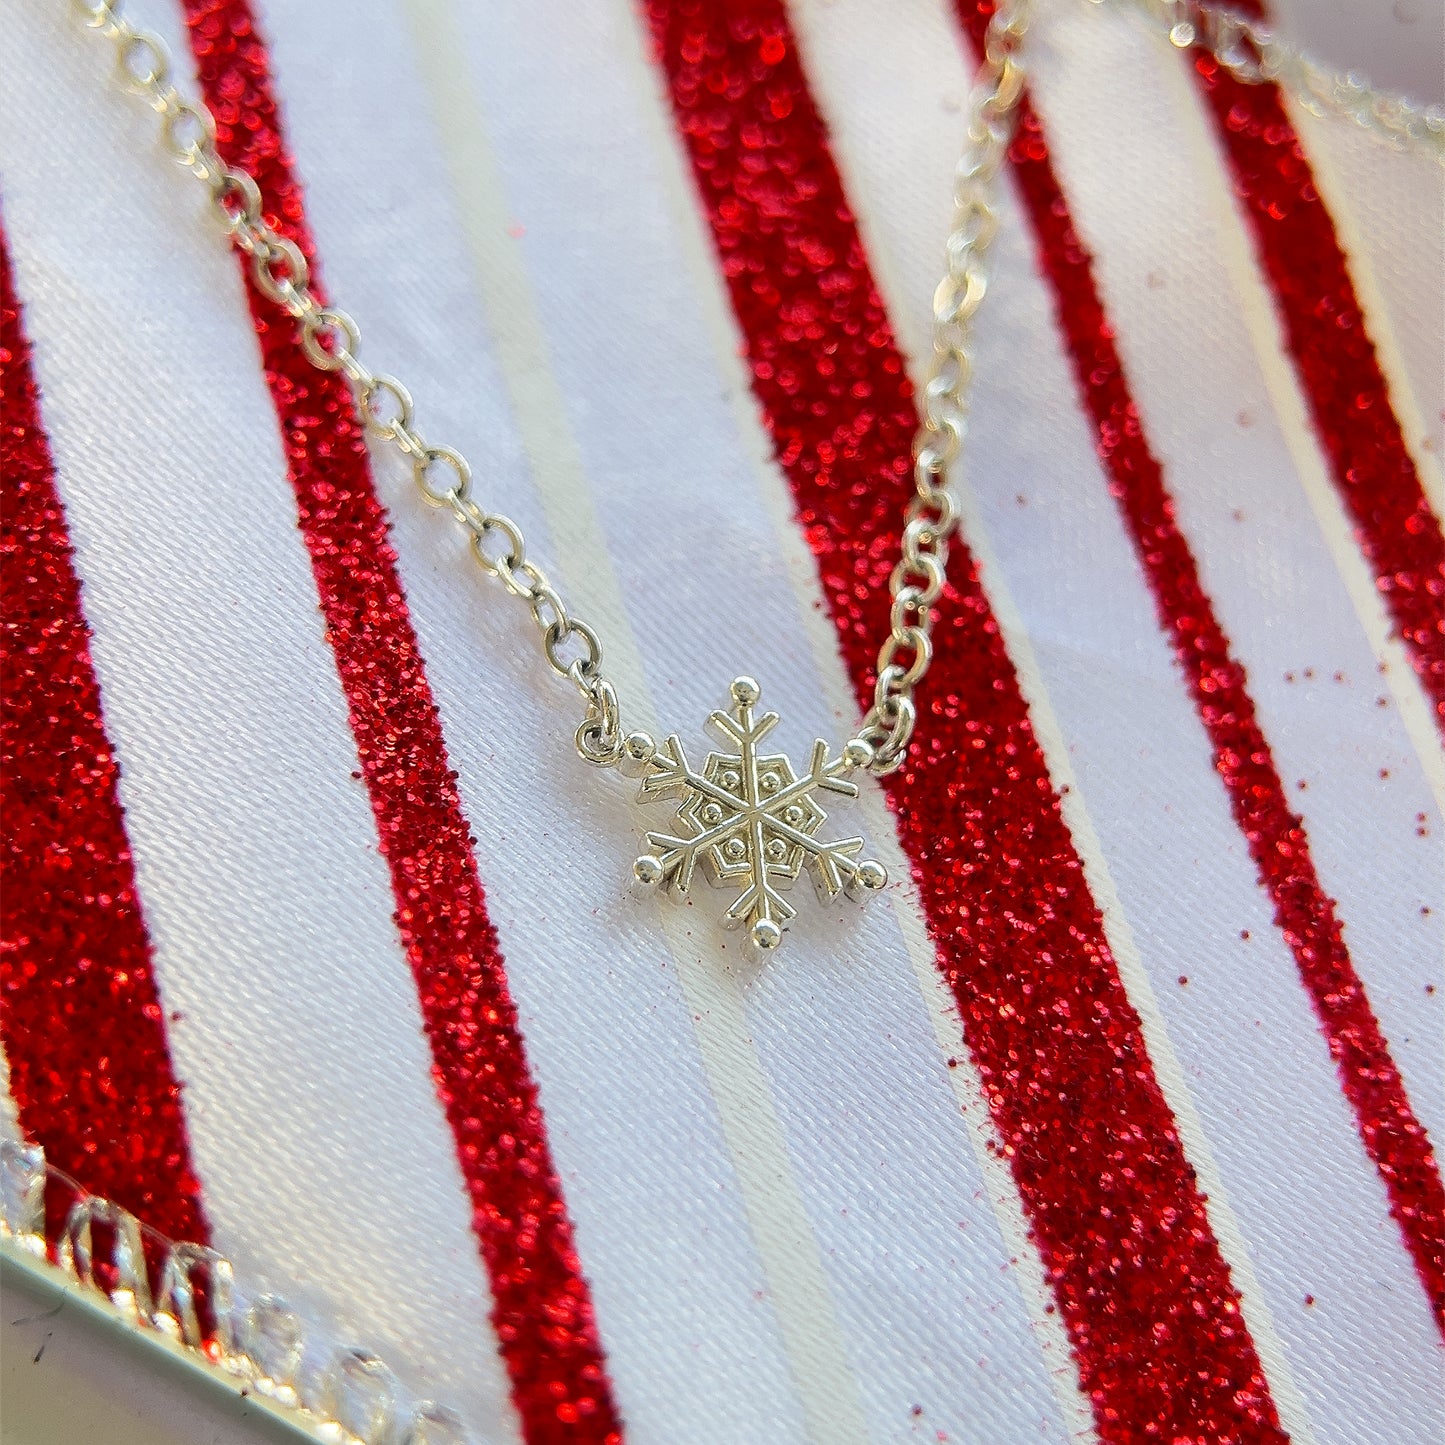 The Tiny Snowflake necklace